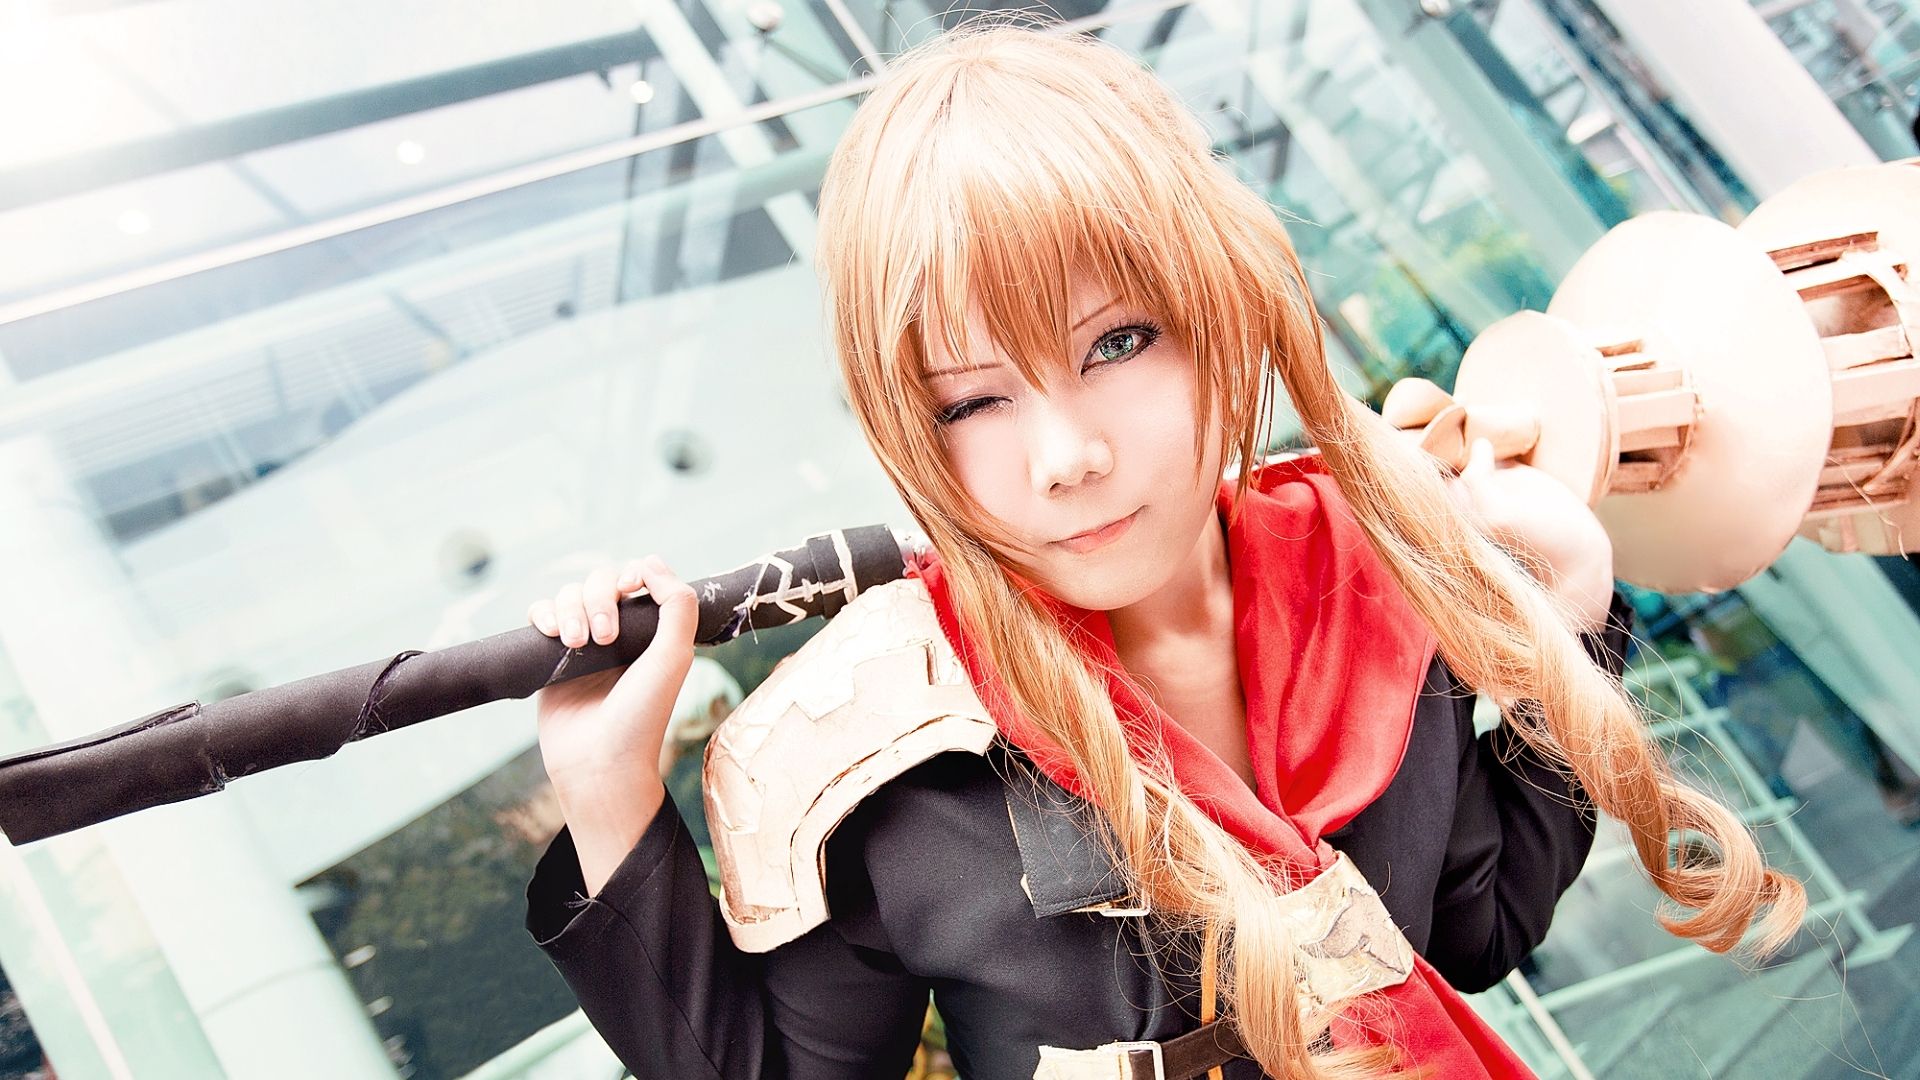 Hd & Widescreen Wallpaper Of A Cinque Cosplay By Inushio - Cosplay , HD Wallpaper & Backgrounds